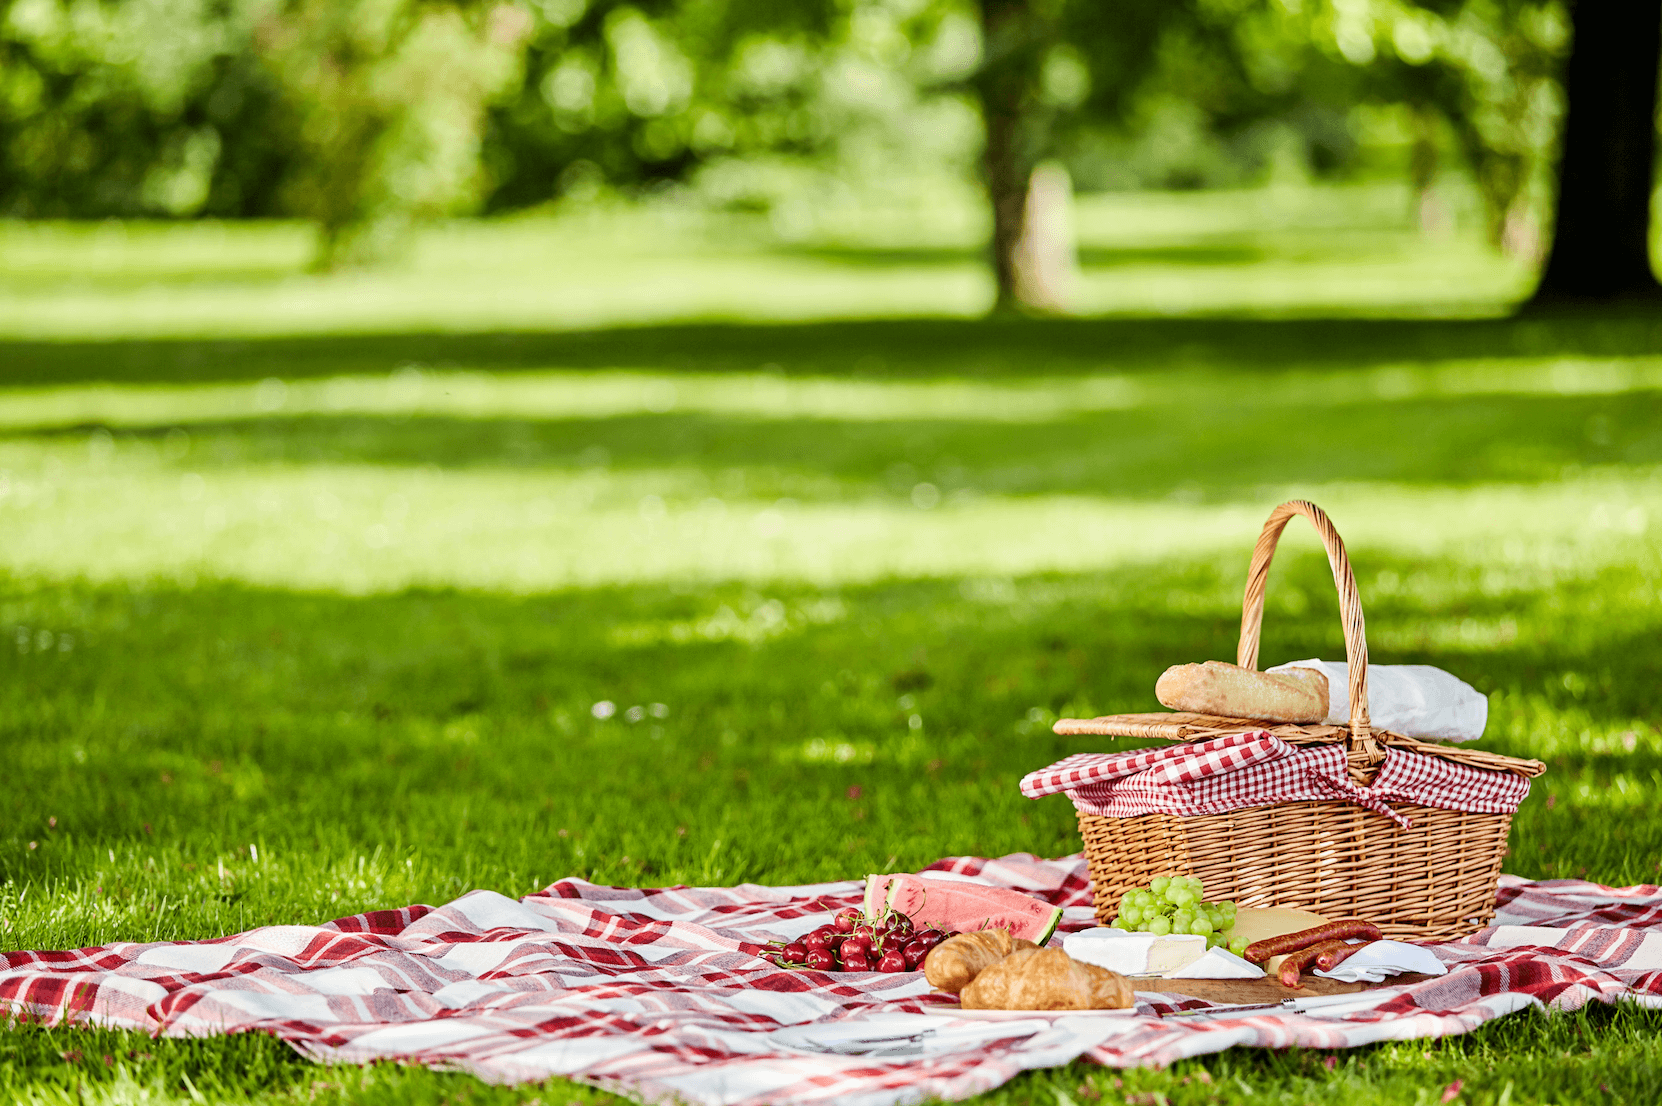 Celebrate International Picnic Day With Delicious Food and Sunshine